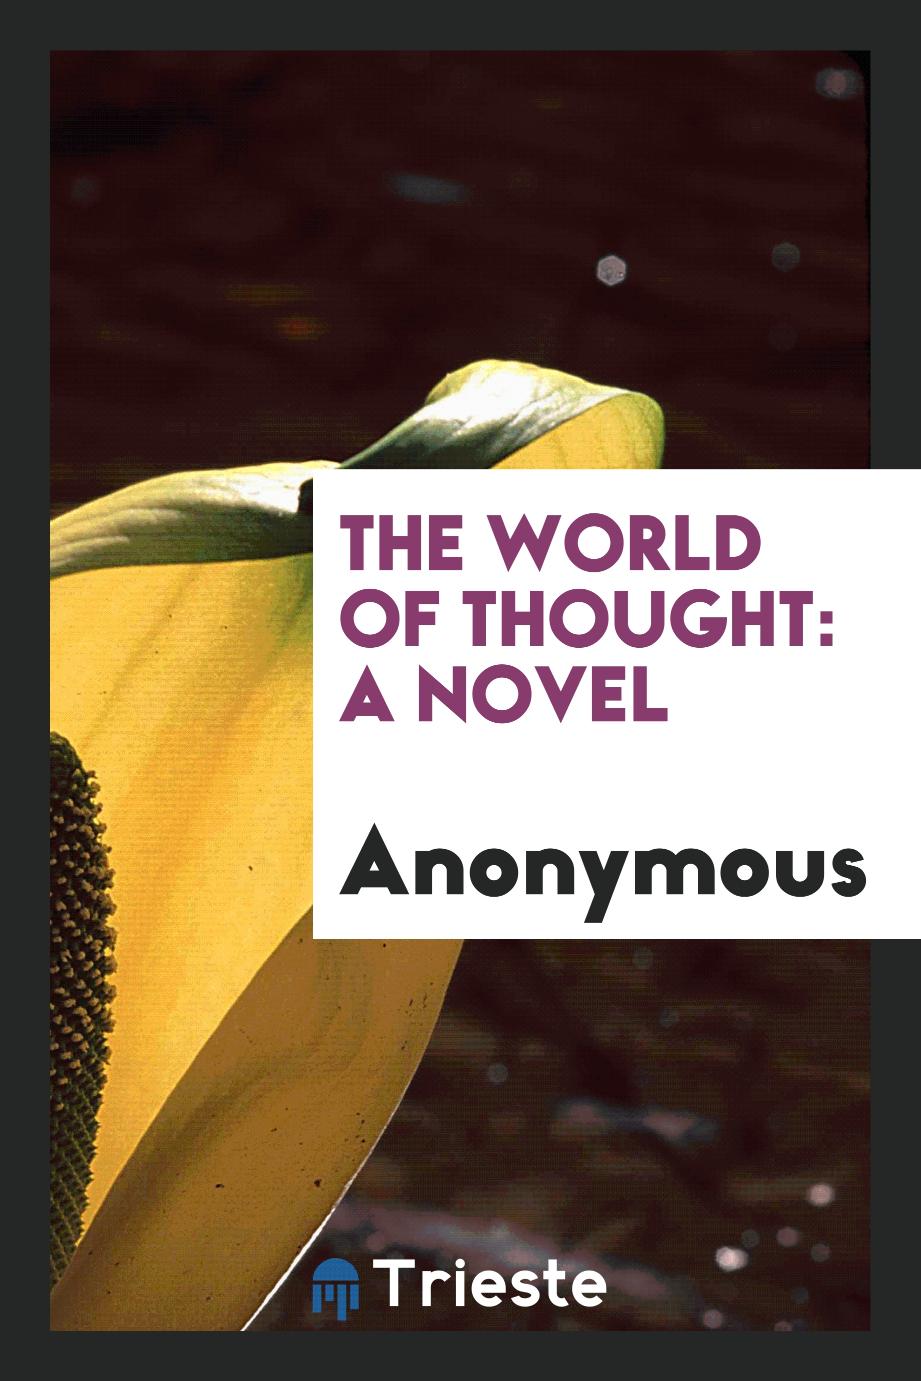 The World of thought: a novel